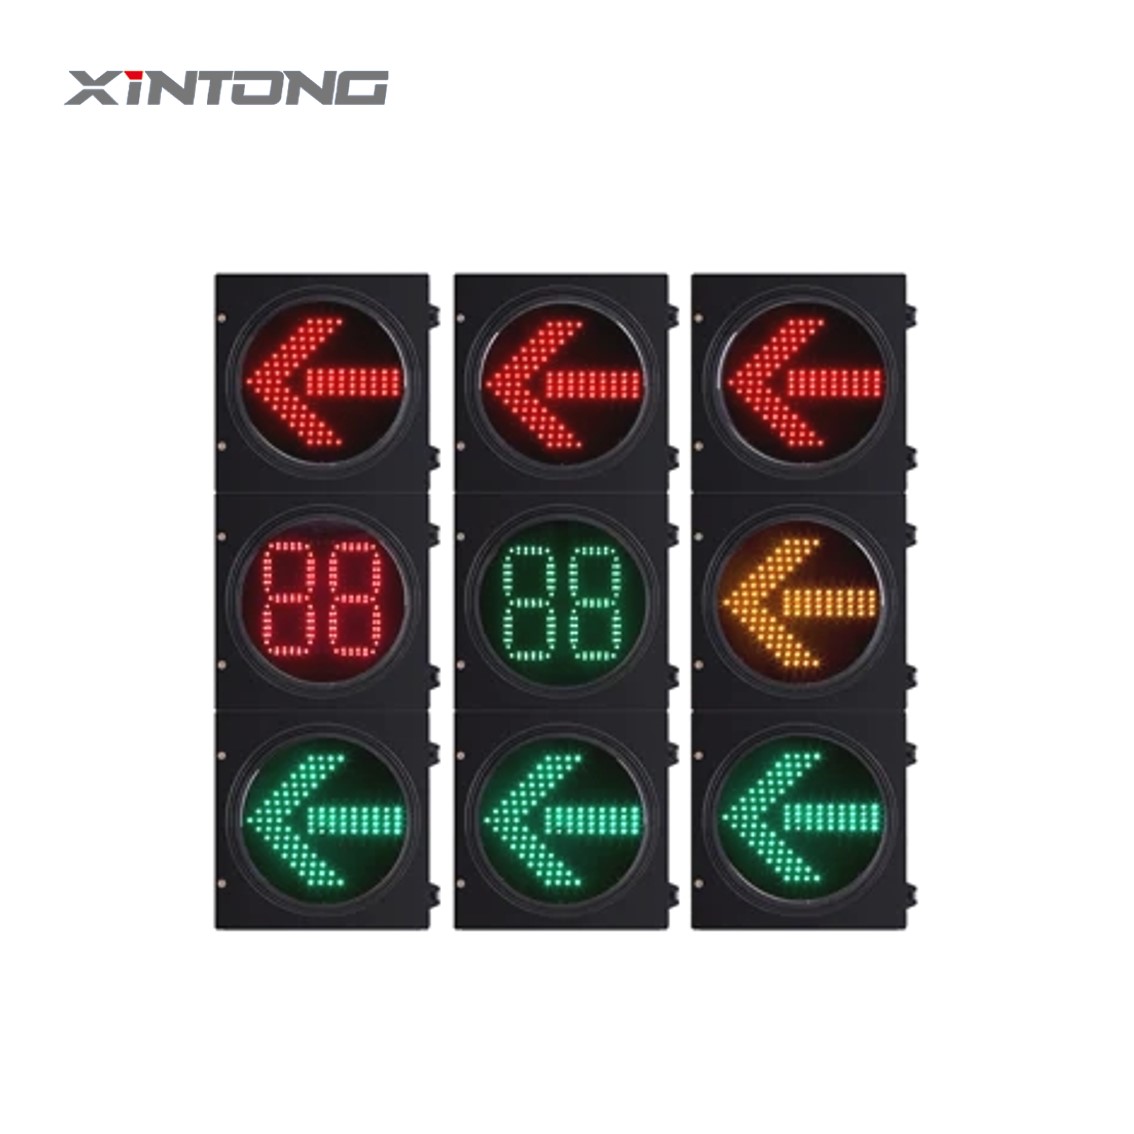 300mm left turn arrow traffic light with countdown